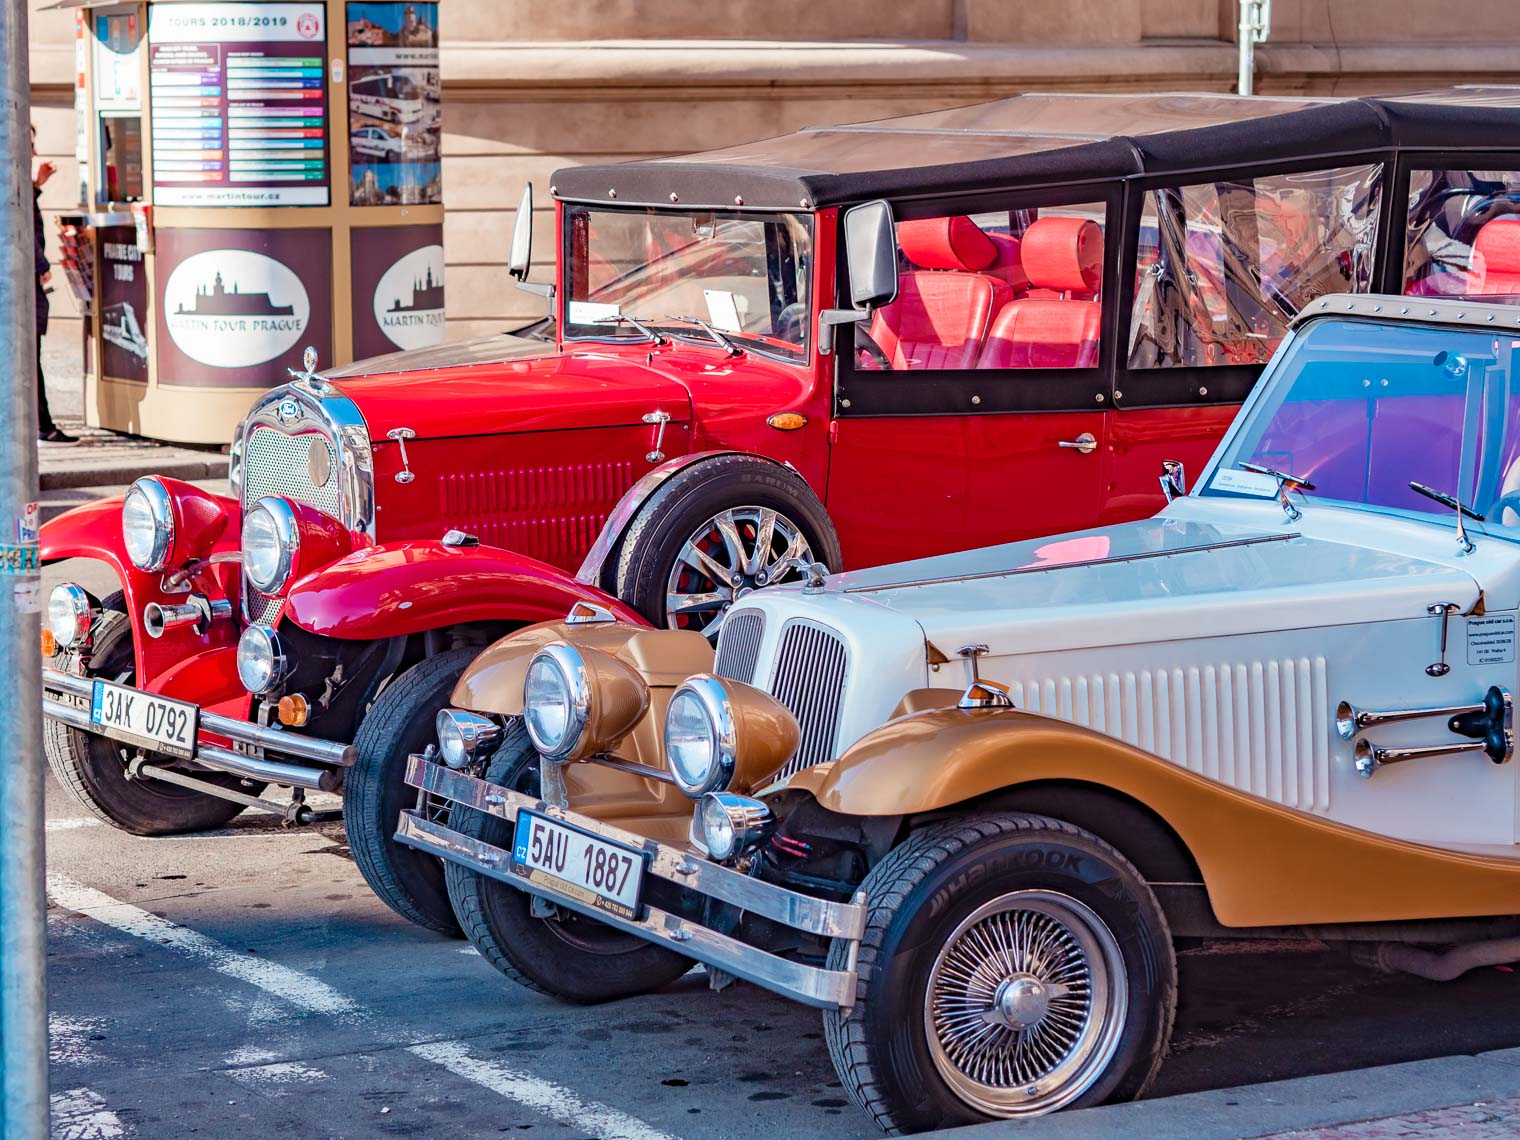 Prague sightseeing in historical cars